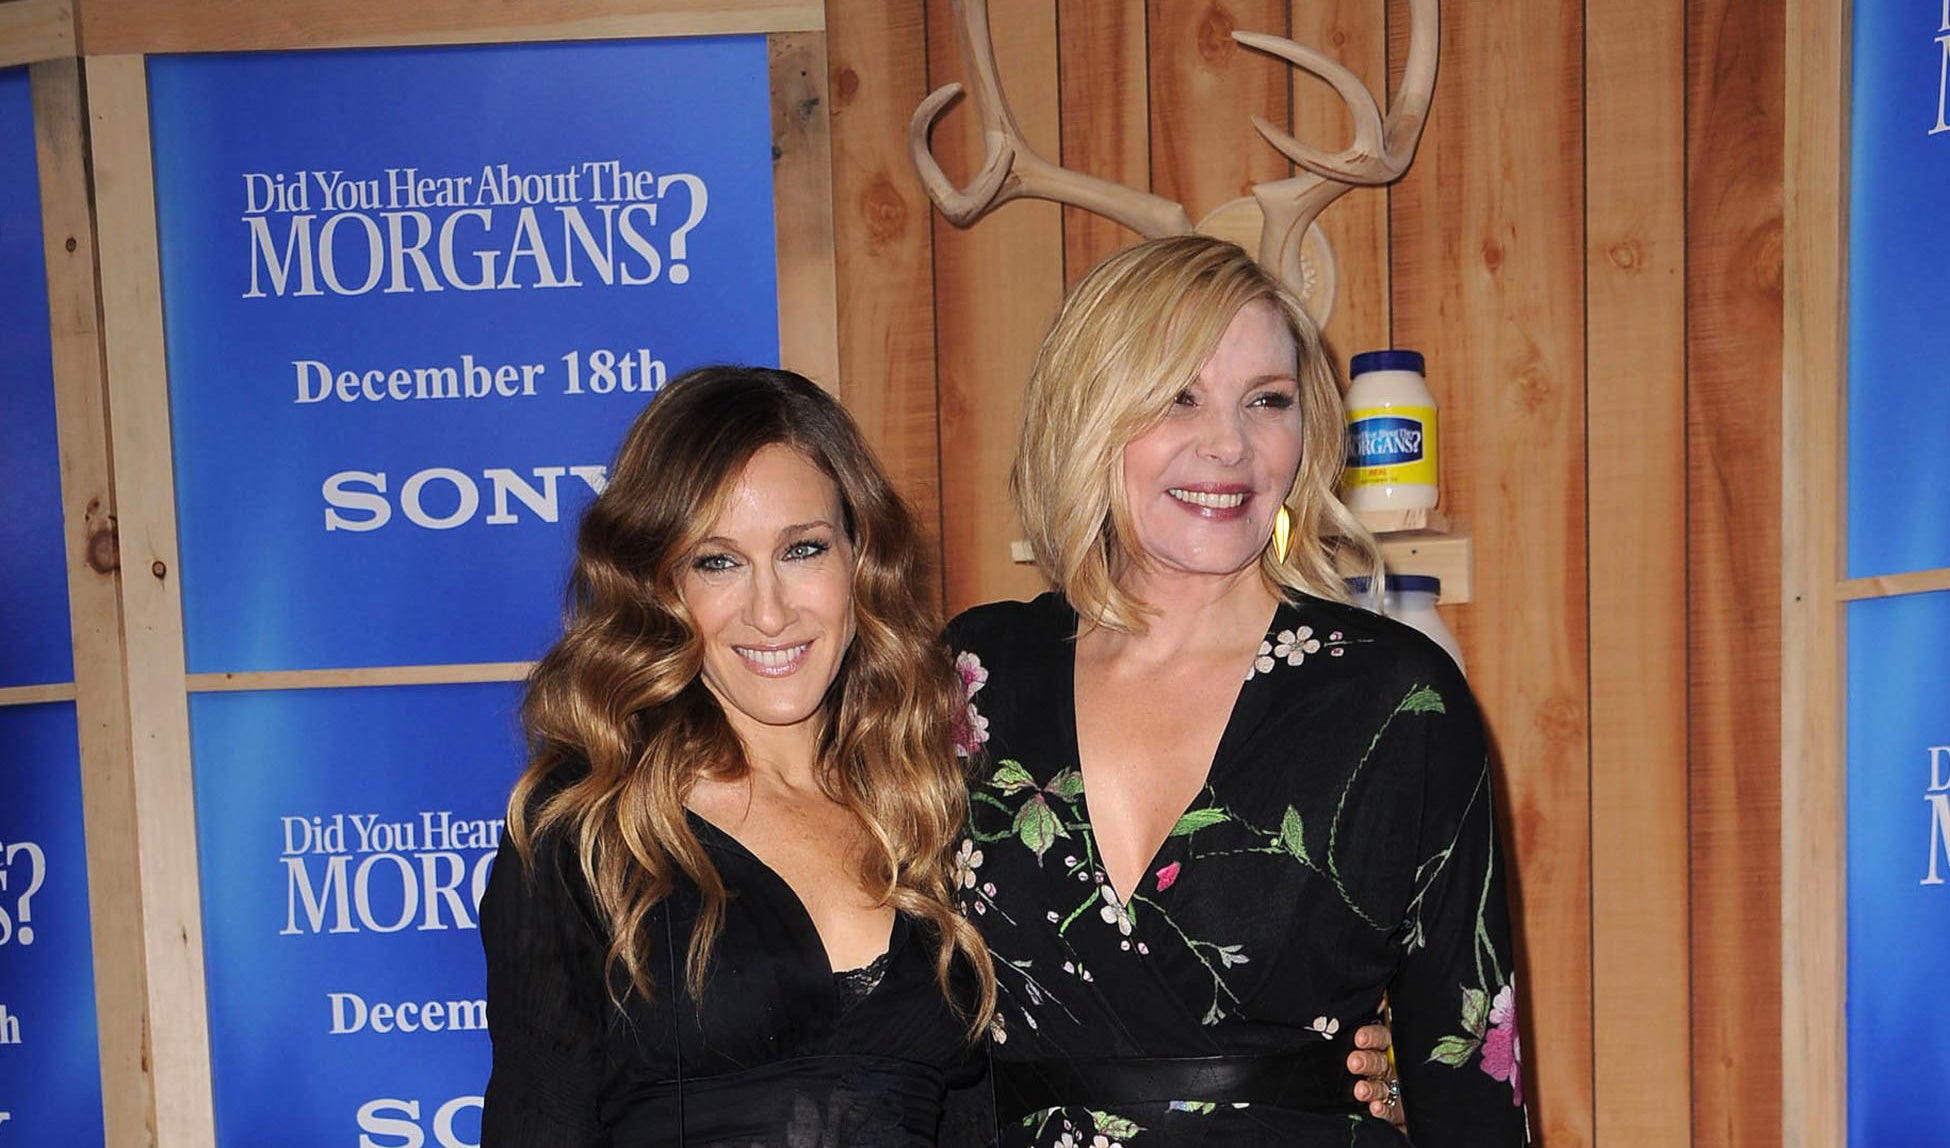 Sarah Jessica Parker and Kim Cattrall attend the premiere of &quot;Did You Hear About The Morgans?&quot;